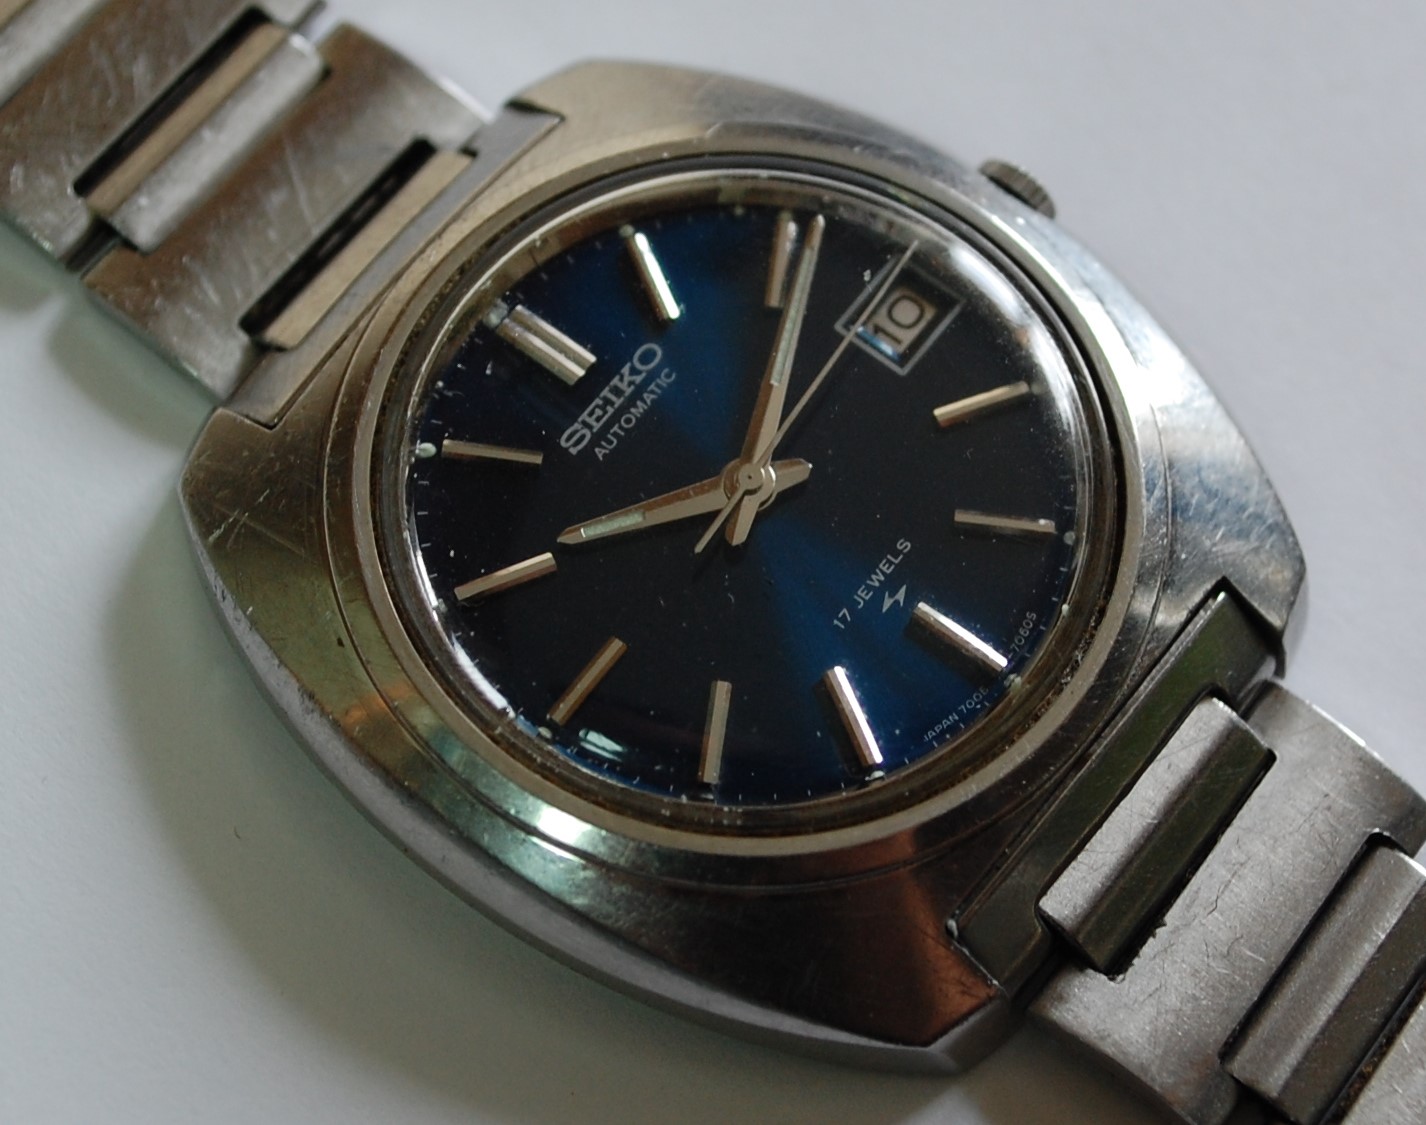 SOLD 1973 Seiko automatic 7005-7072 - Birth Year Watches